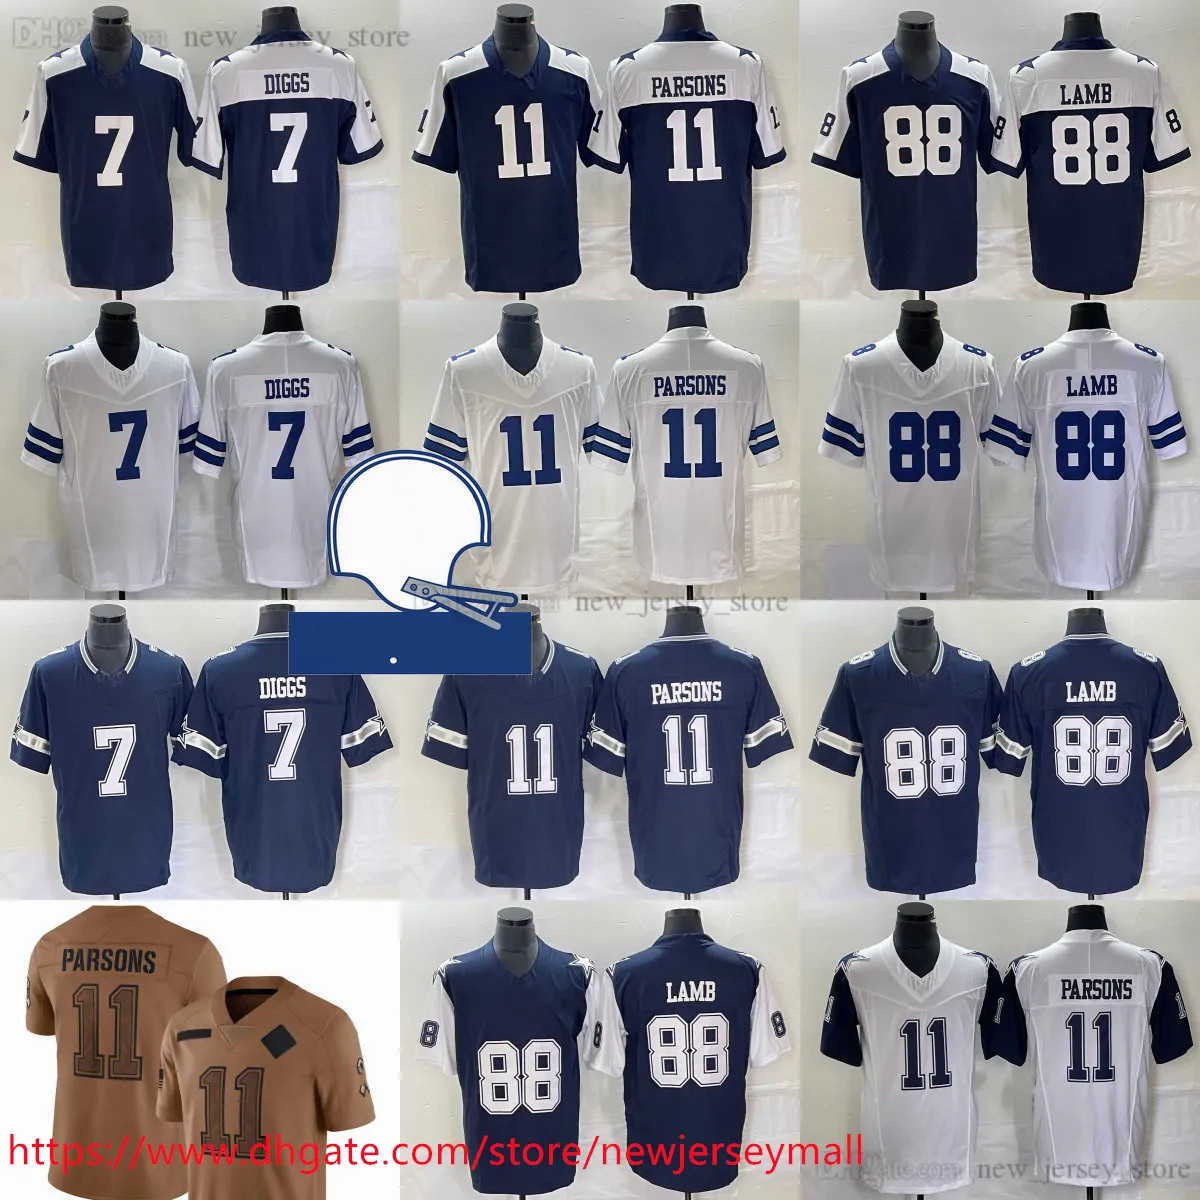 11 Micah Parsons Jersey 2023-24 New Limited Football 88 Ceedee Lamb 7 Trevon Diggs Jerseys 1960 패치 통기성 스포츠 홈 어웨이 Navy White 3nd Limited